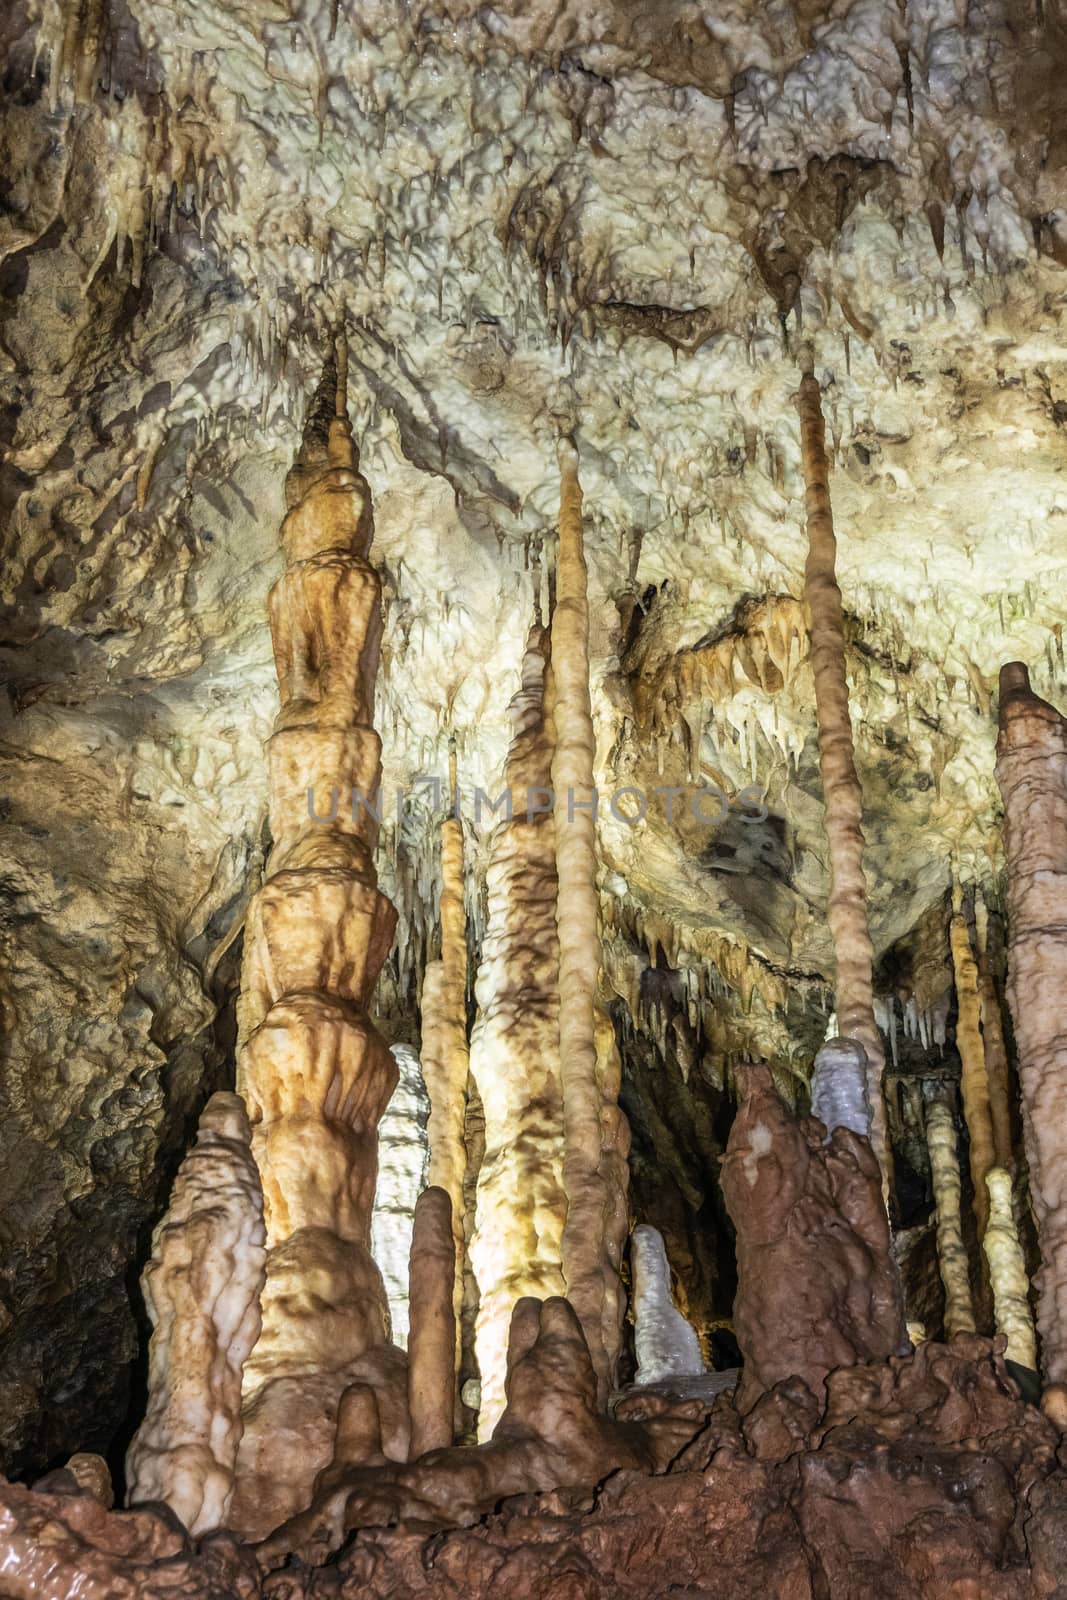 Stalagmites fused with stalactites in Grottes-de-Han, Han-sur-le by Claudine